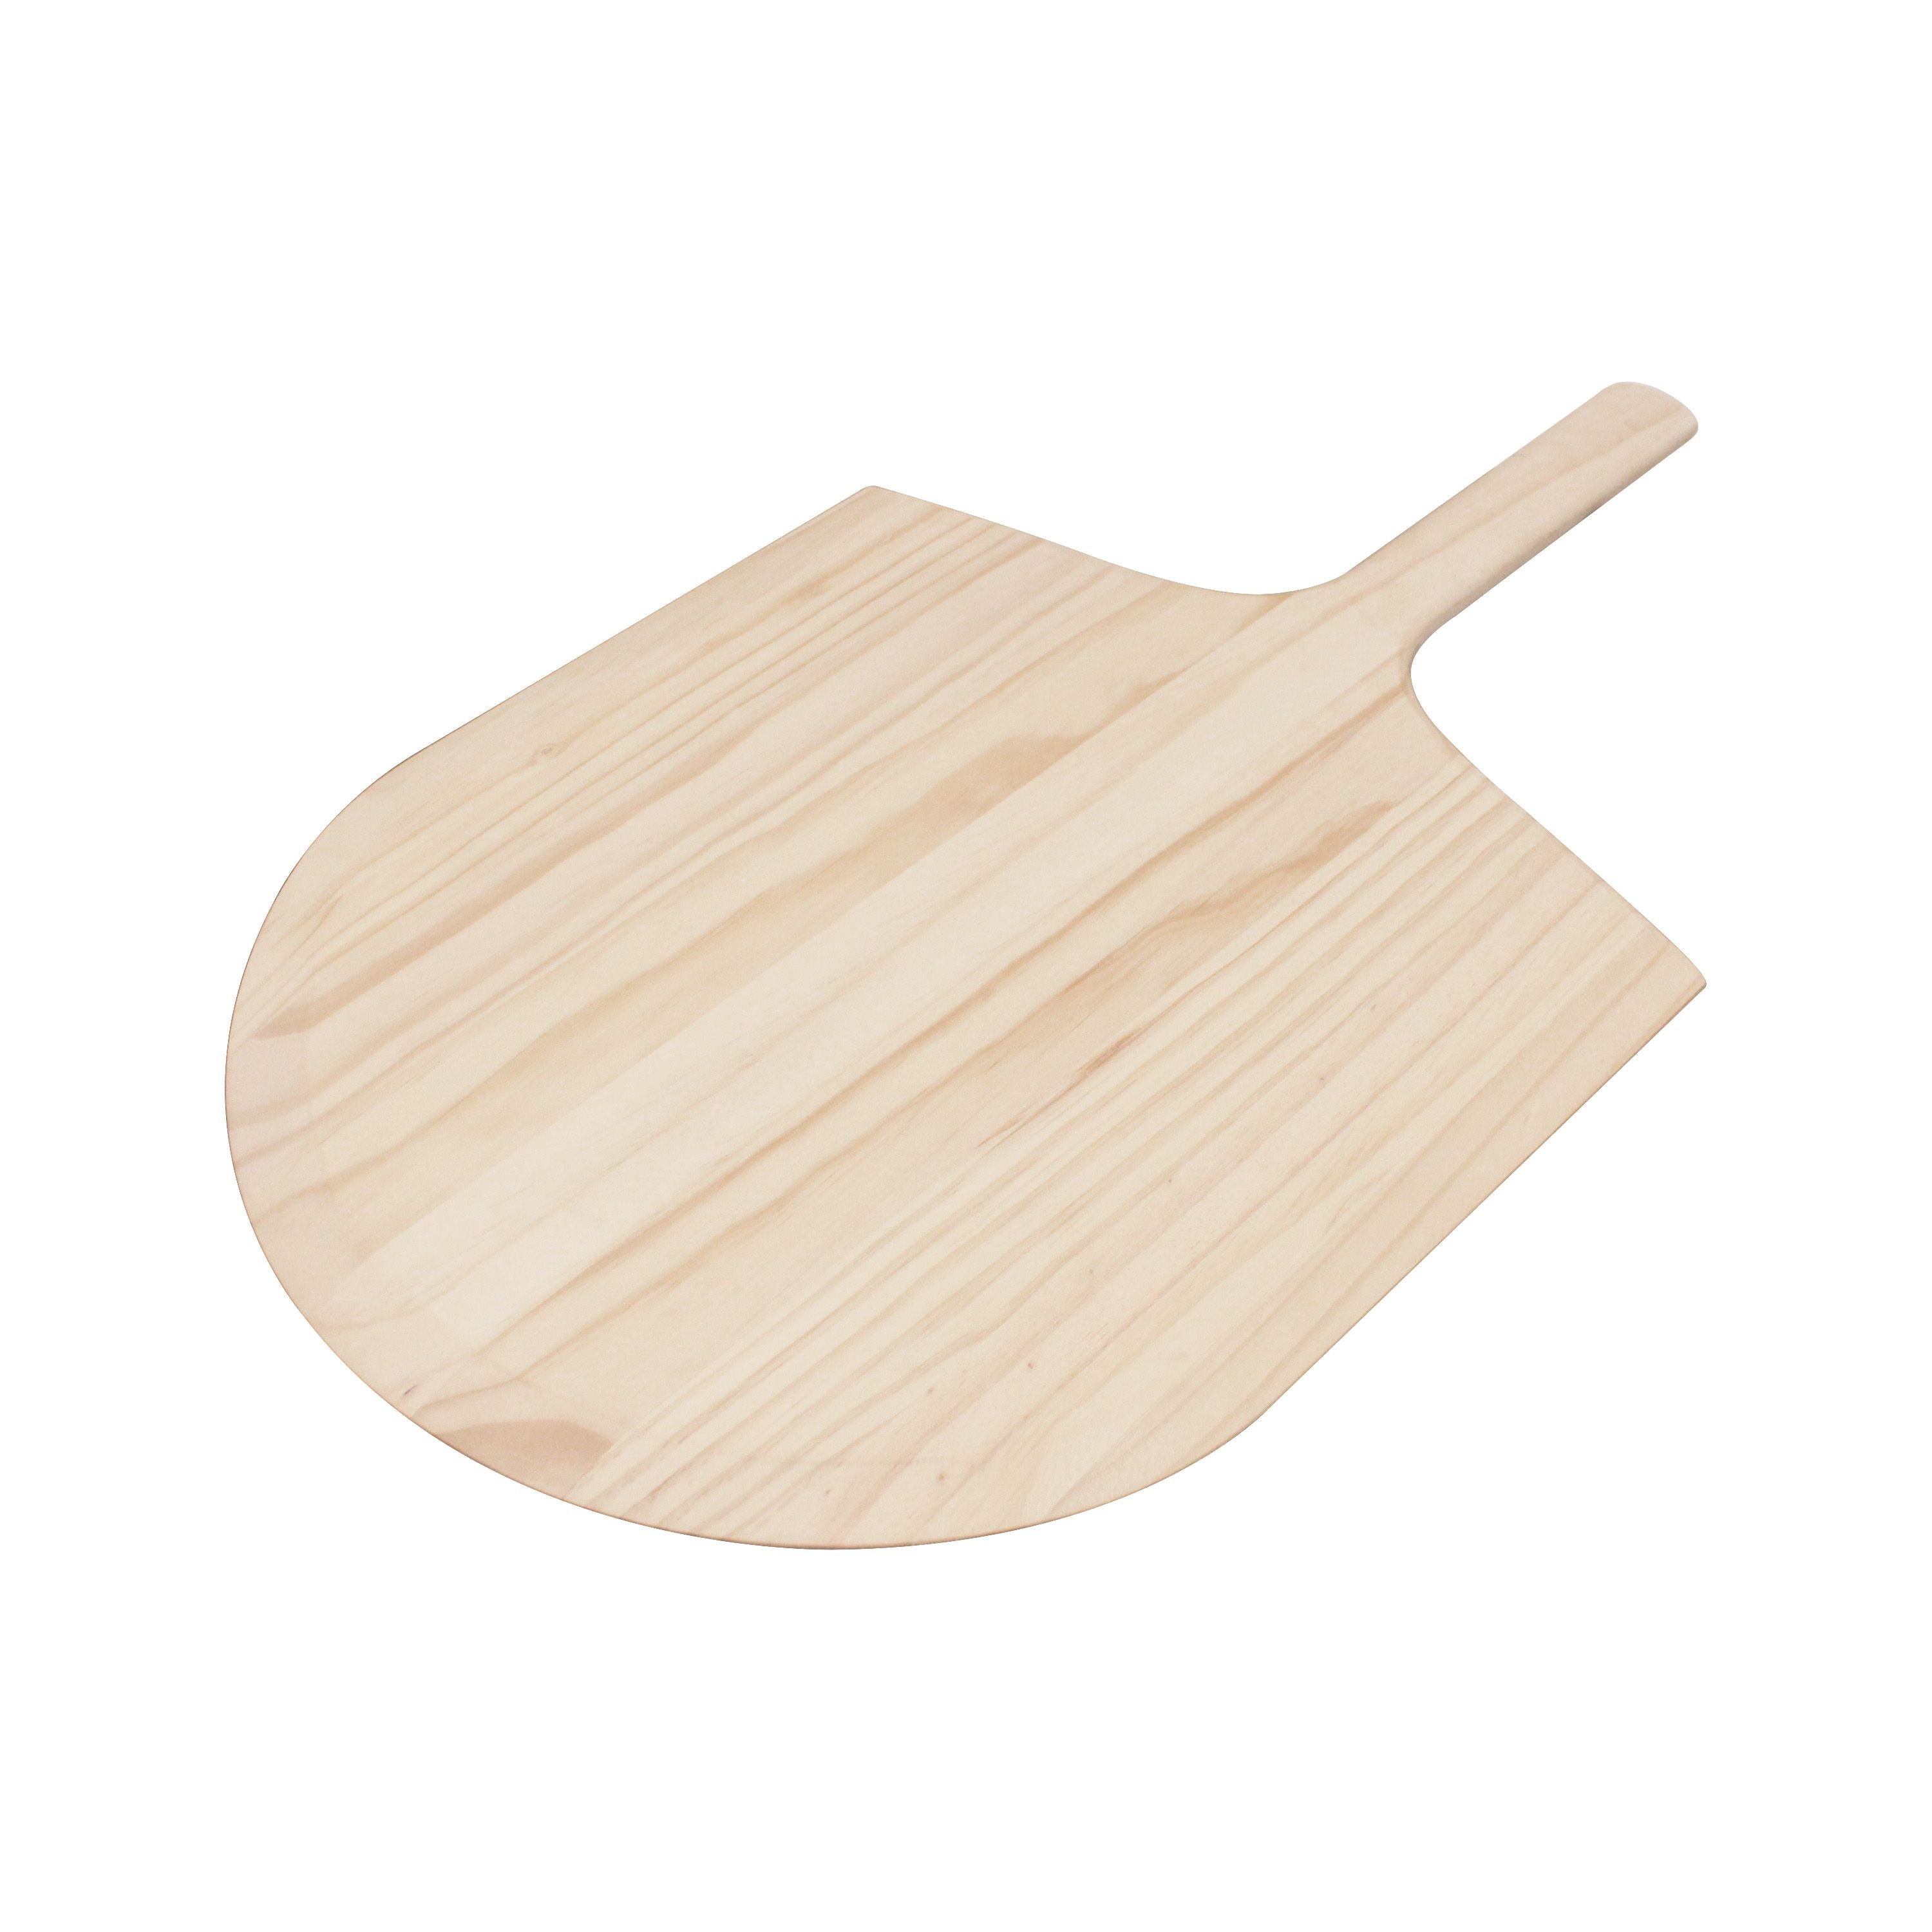 Thunder Group WDPP1424 Wooden Pizza Peel 14" x 16" Blade, 24" Overall Length